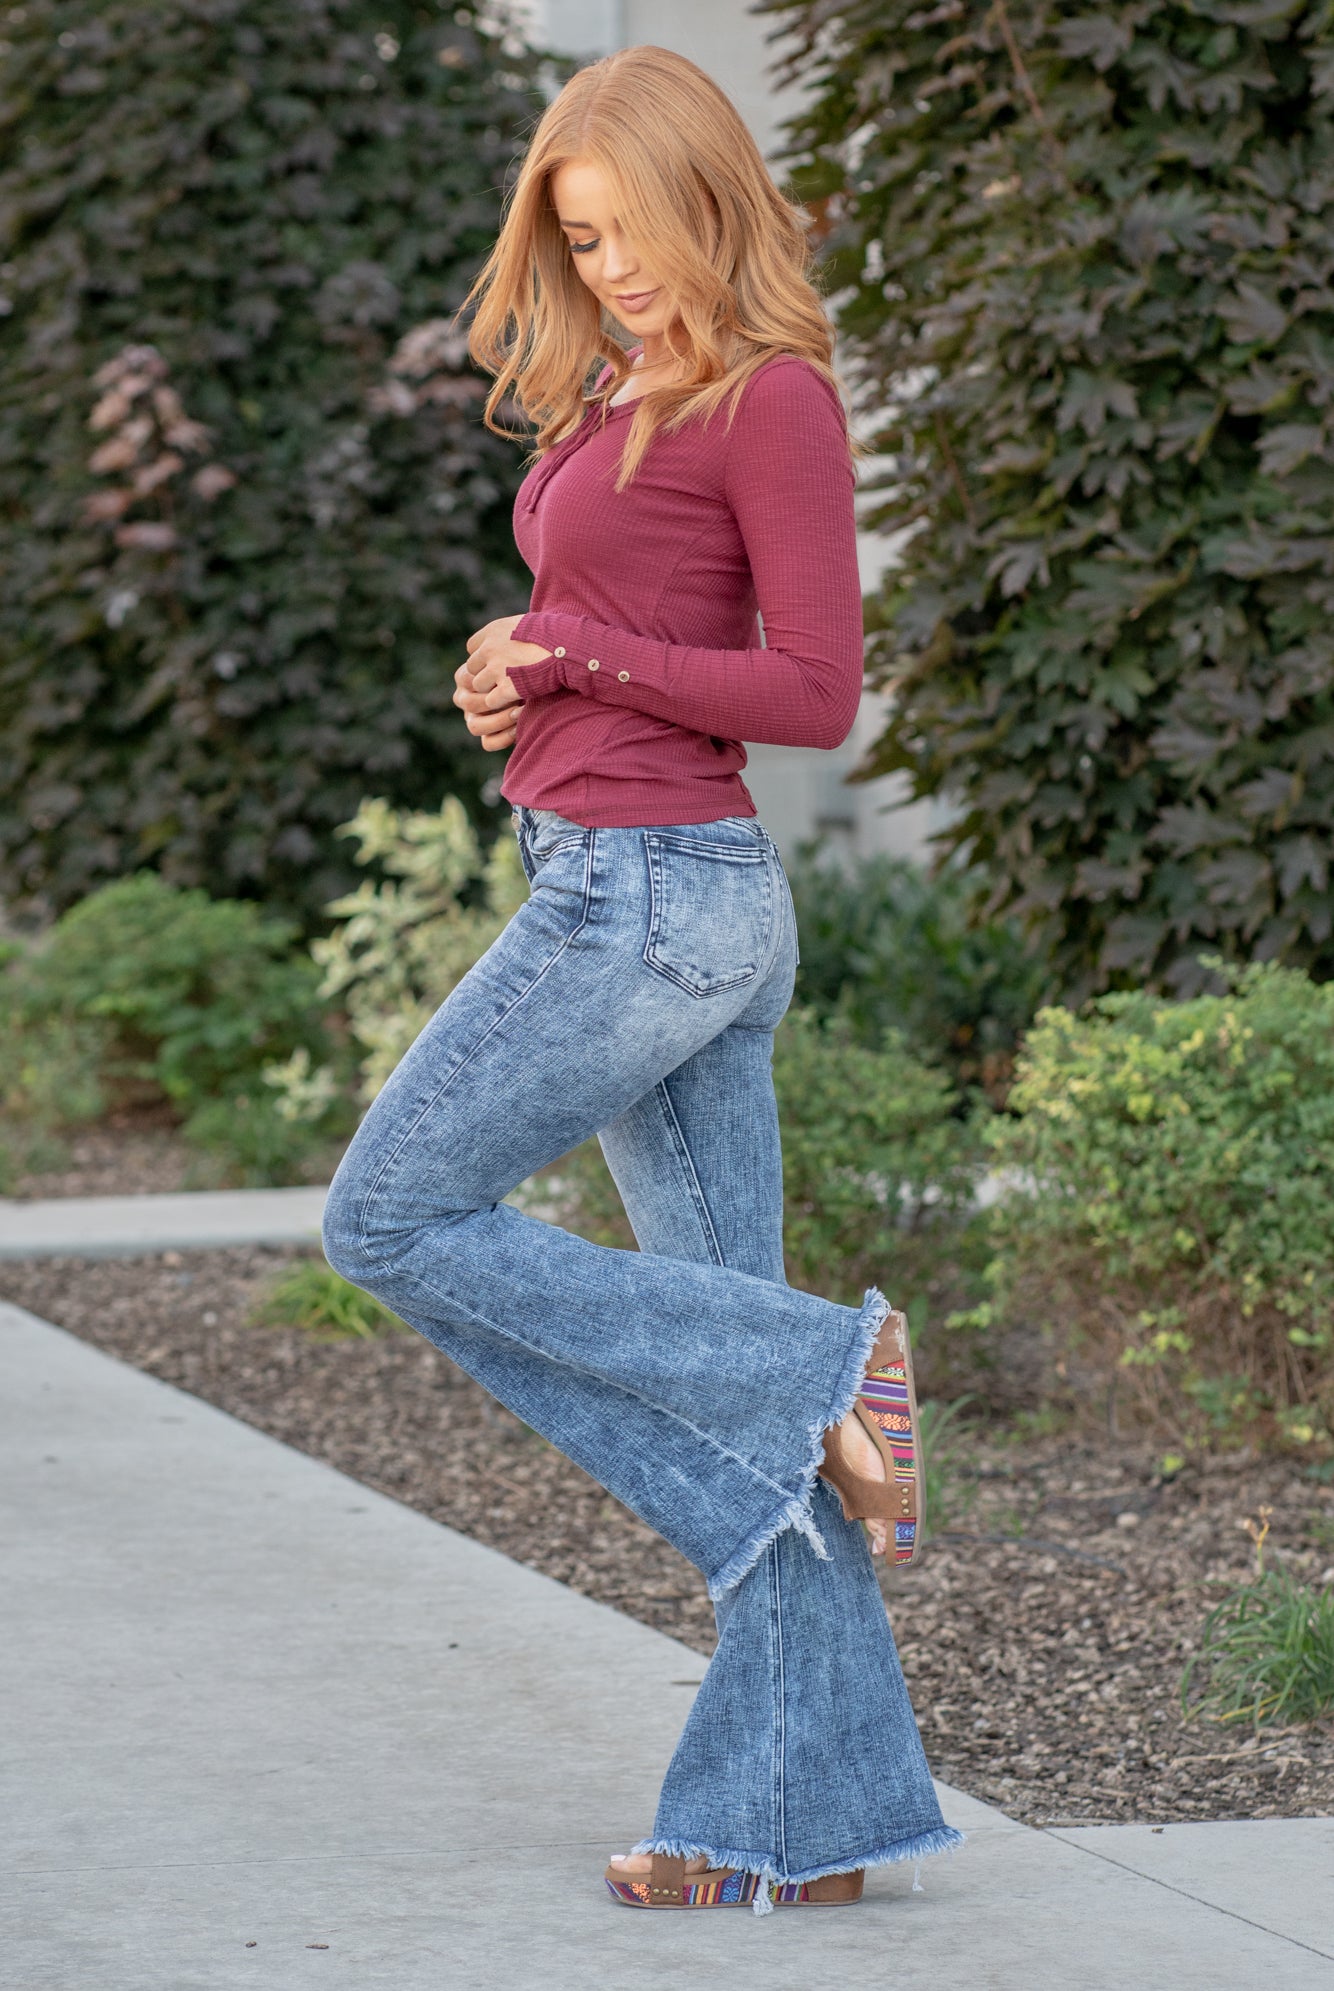 VERVET by Flying Monkey Jeans  This mid rise flare from VERVET is so fun with its frayed hem. Pair with heels and a blouse for a dressed up outlook. Skinny, 34" Inseam* Rise: Mid Rise, 9" Front Rise* Leg Opening: 25"* Material: 98% Cotton, 2% Spandex Stitching: Classic Fly: Zip Fly Style #: V2611 Contact us for any additional measurements or sizing. 